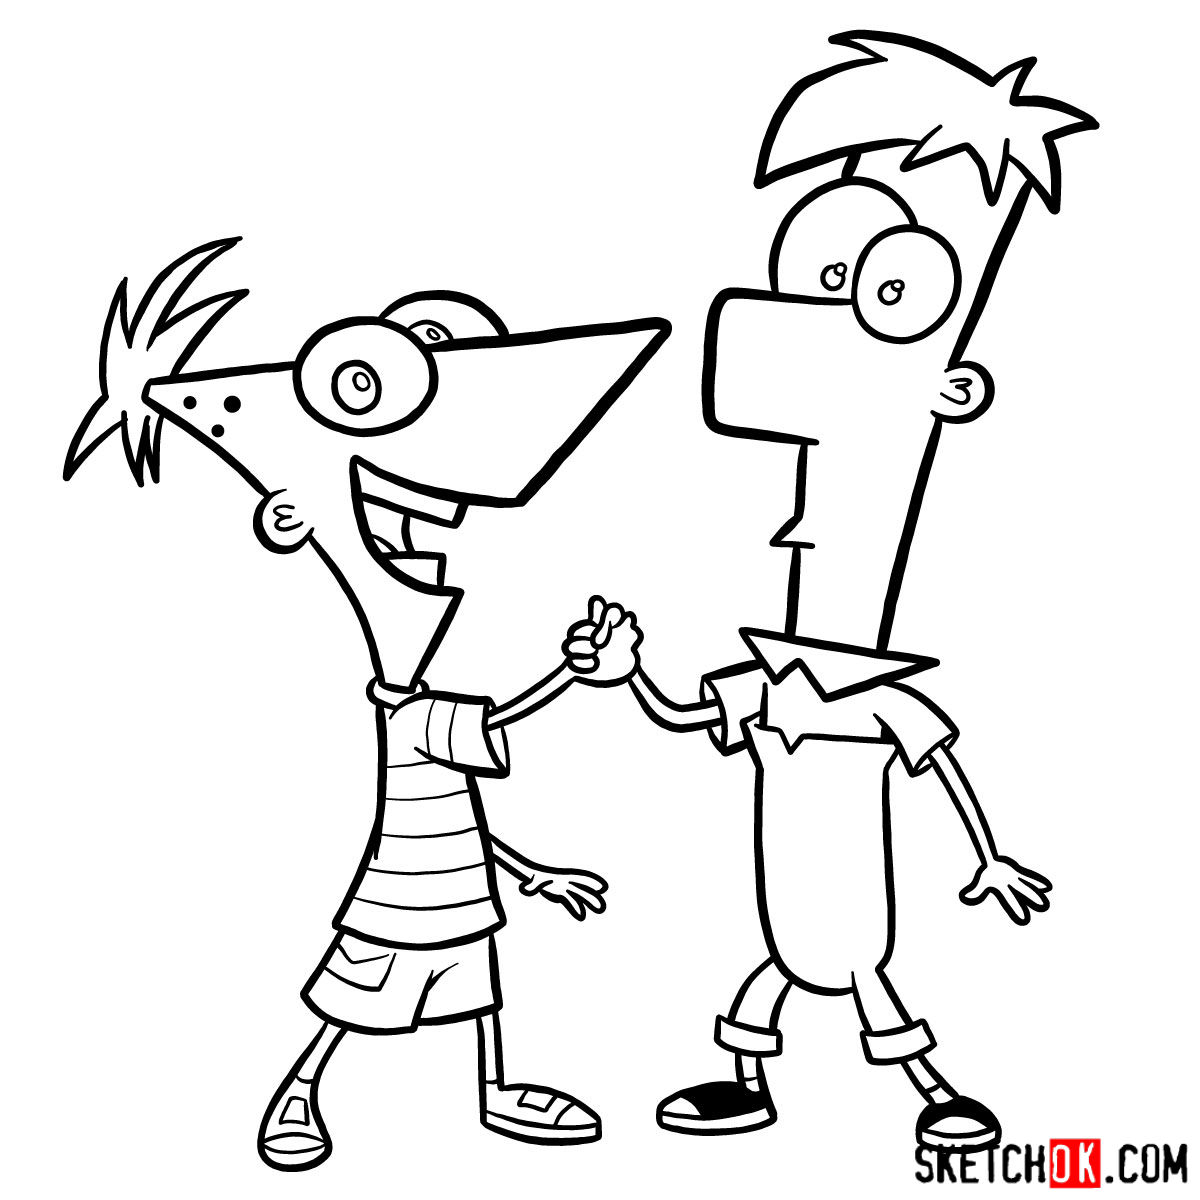 How to Draw Phineas and Ferb from Your Favorite TV Show